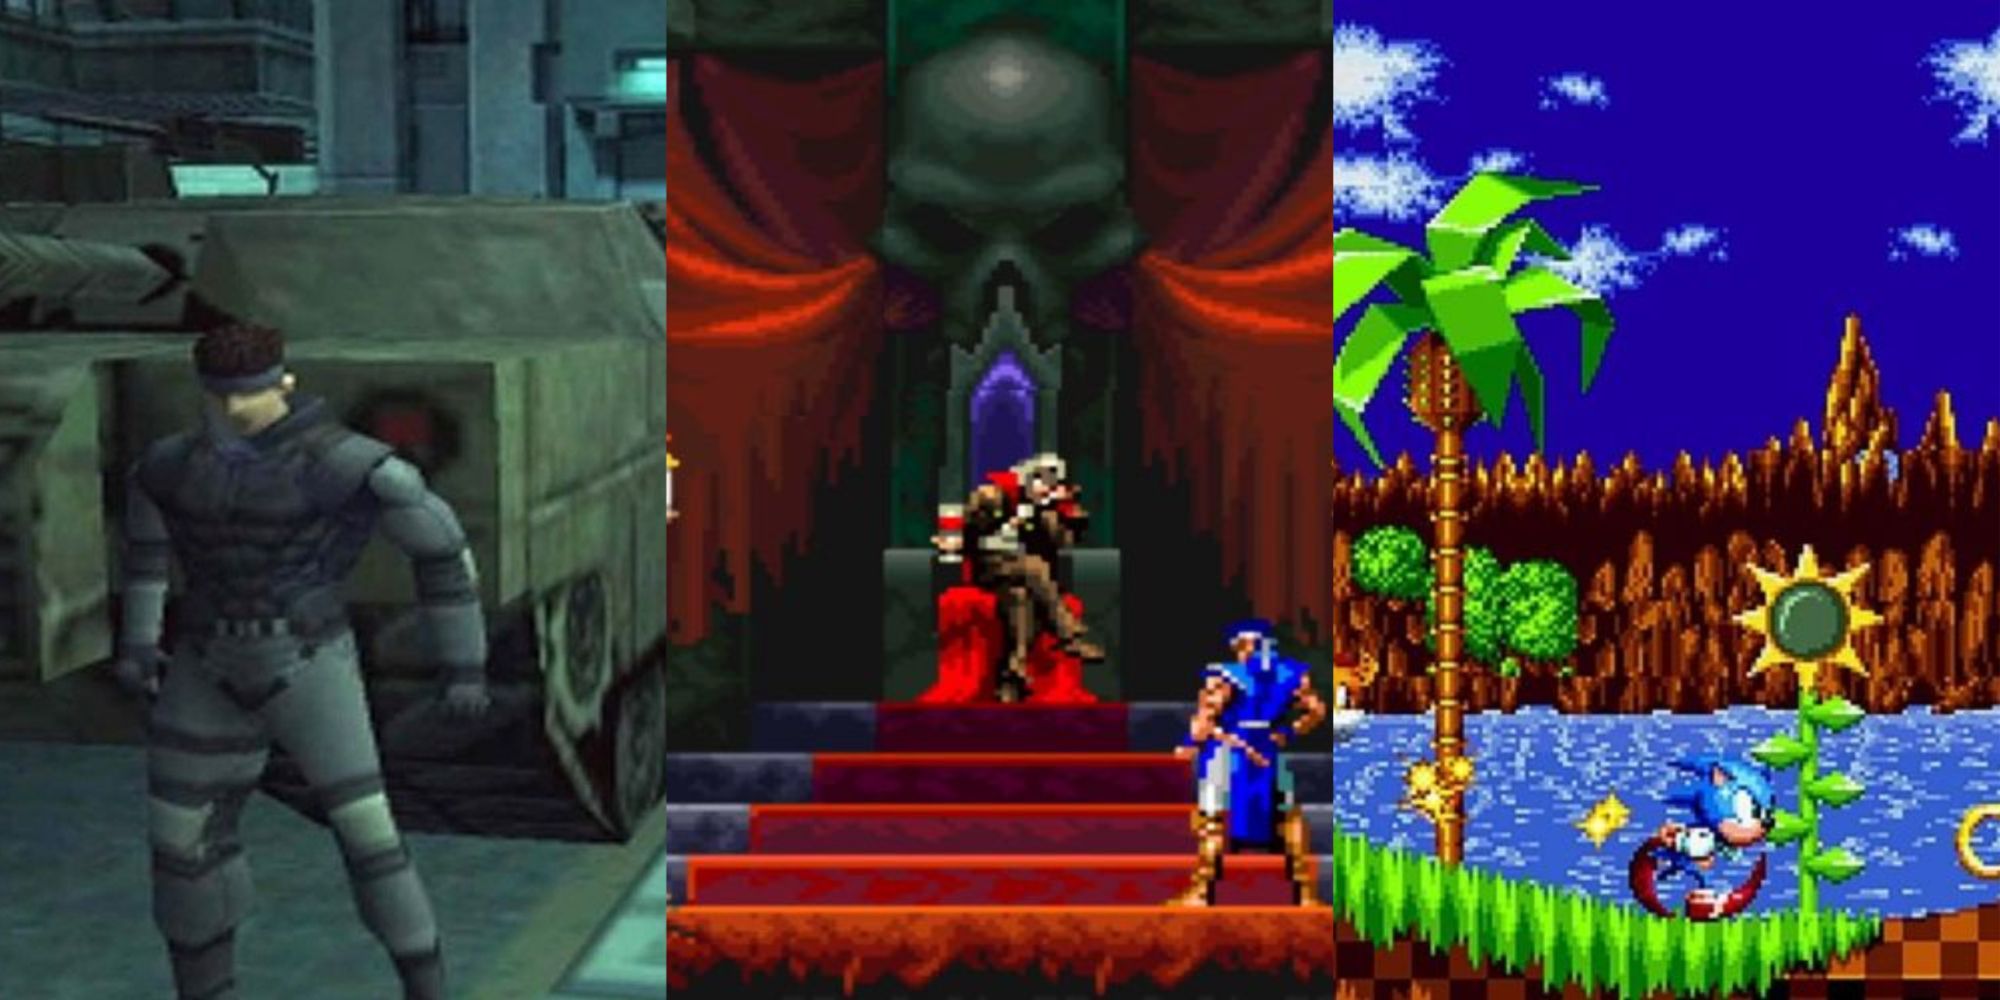 Snake leaning against a tank in Metal Gear Solid, Richter beside Dracula on his throne, and Sonic running in Green Hills, left to right